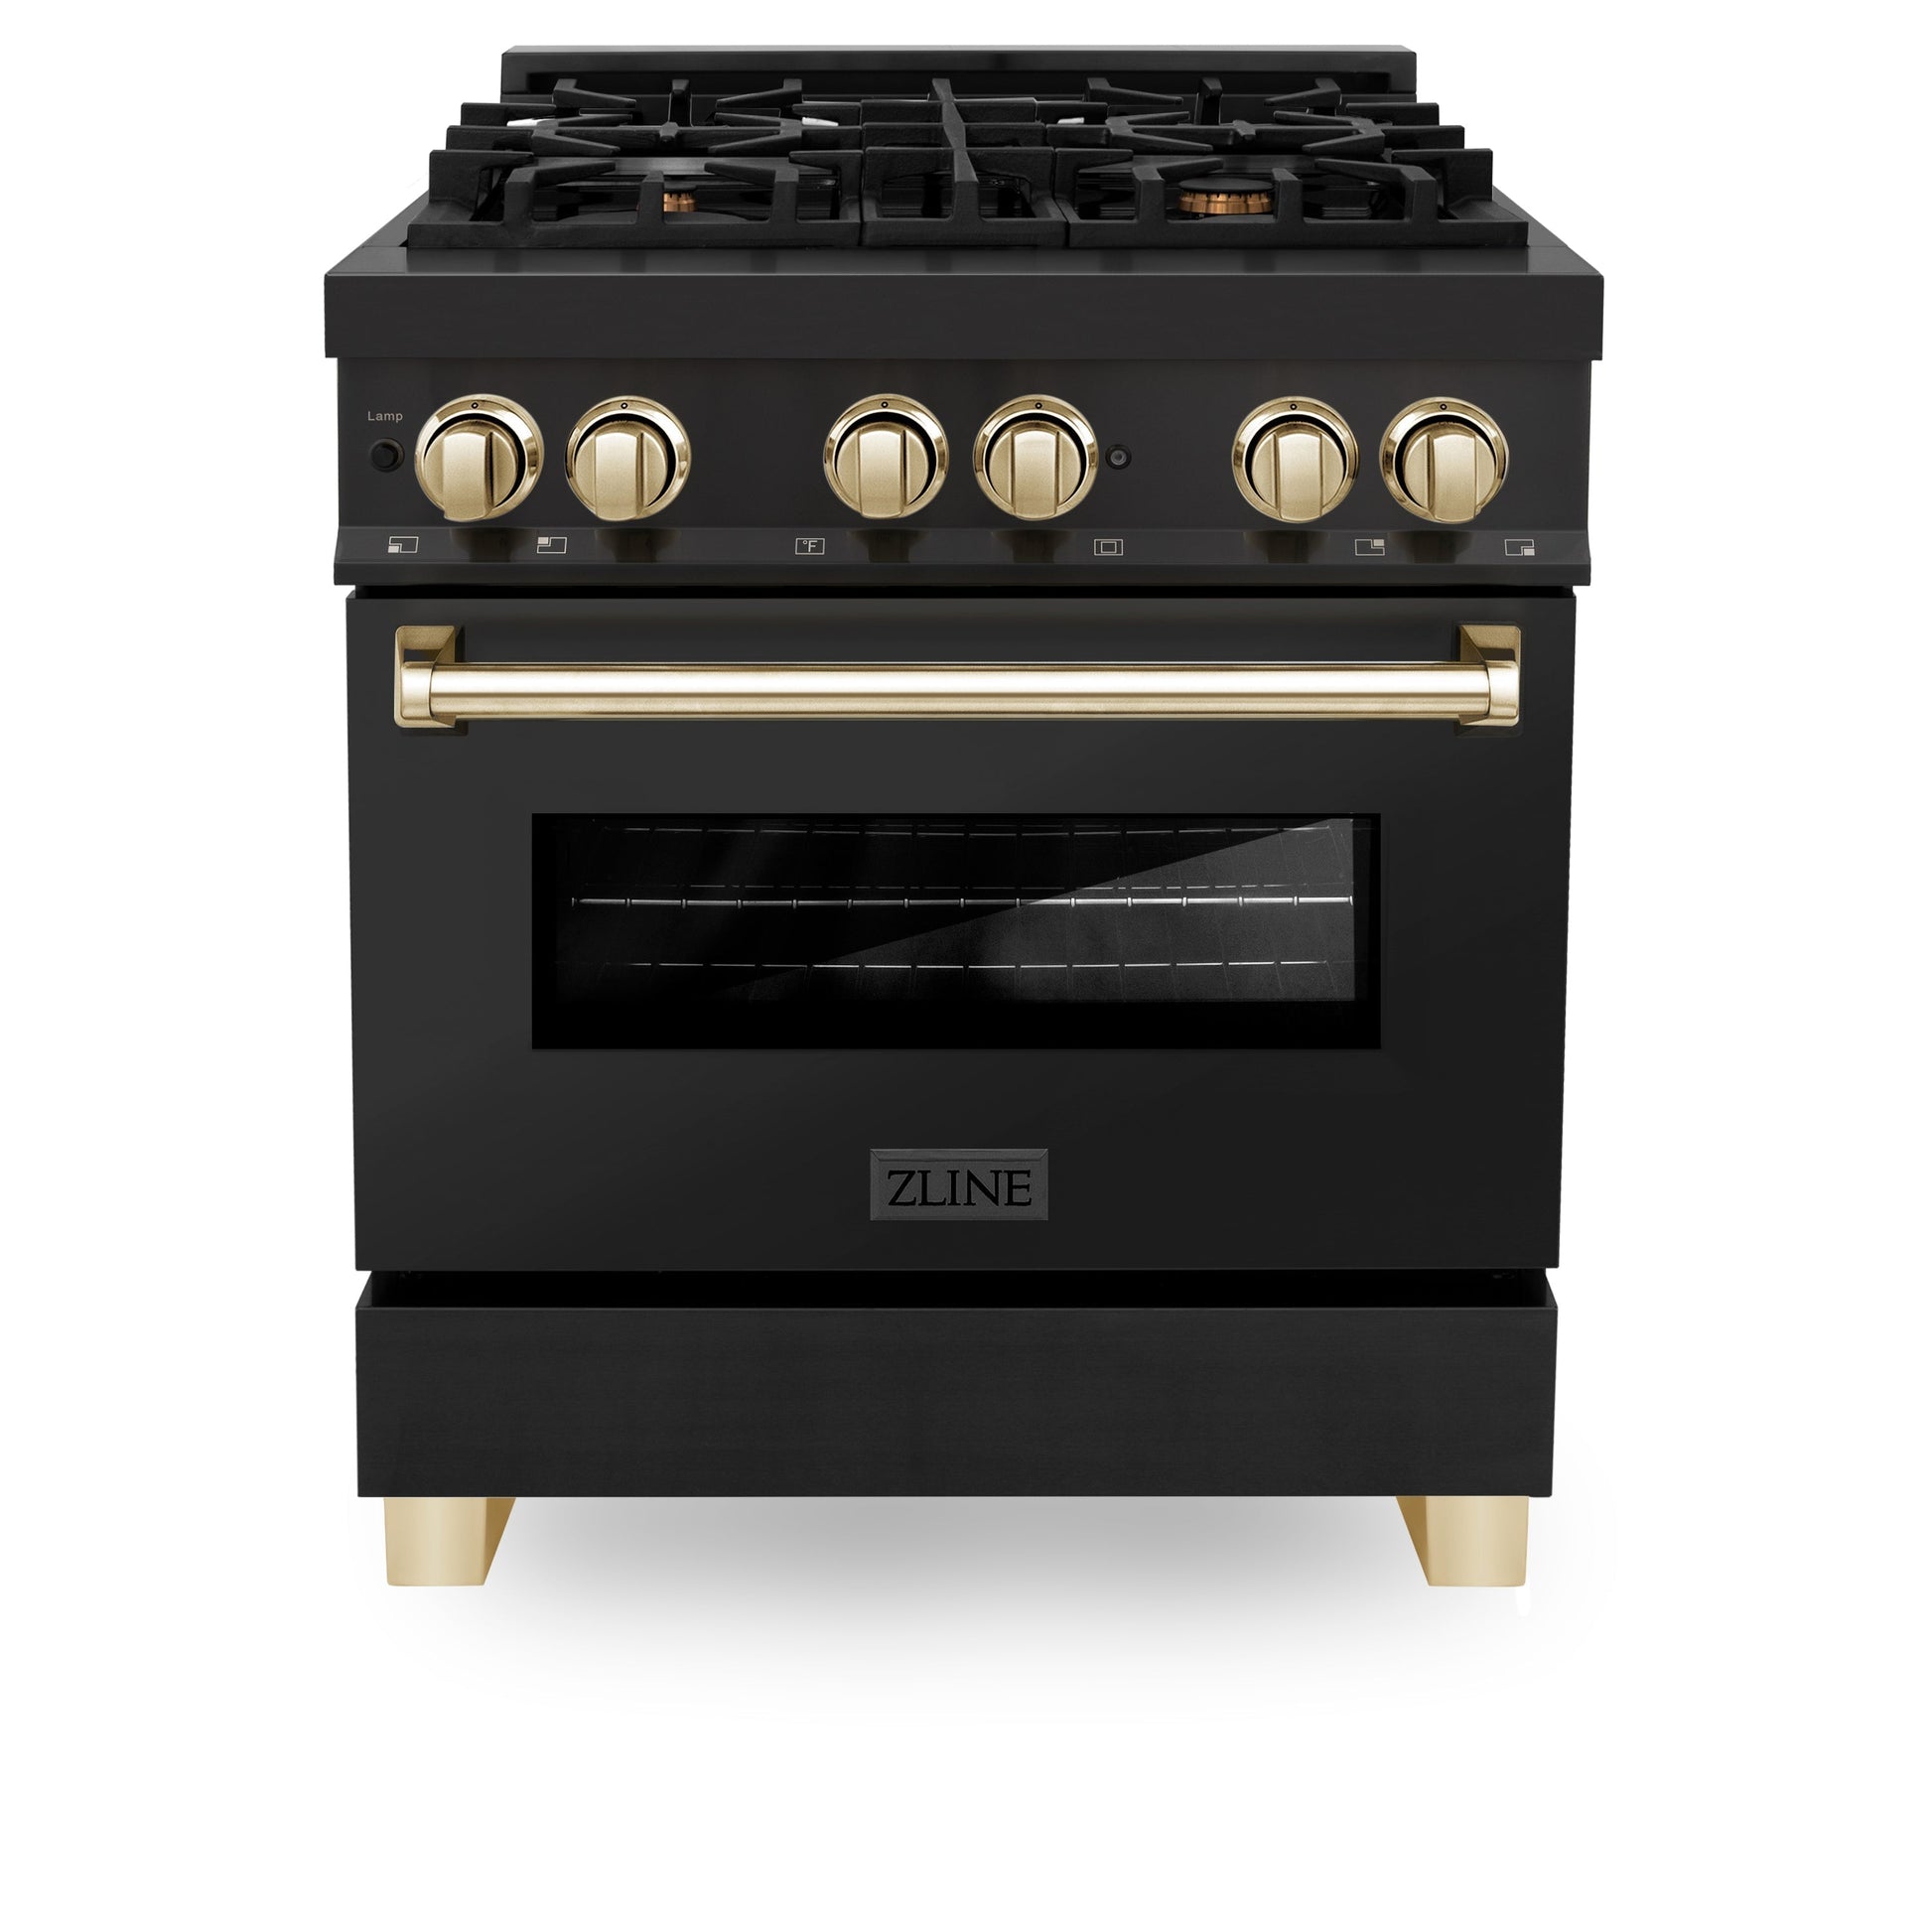 ZLINE Autograph Edition 30" Dual Fuel Range with Gas Stove and Electric Oven - Black Stainless Steel with Accents